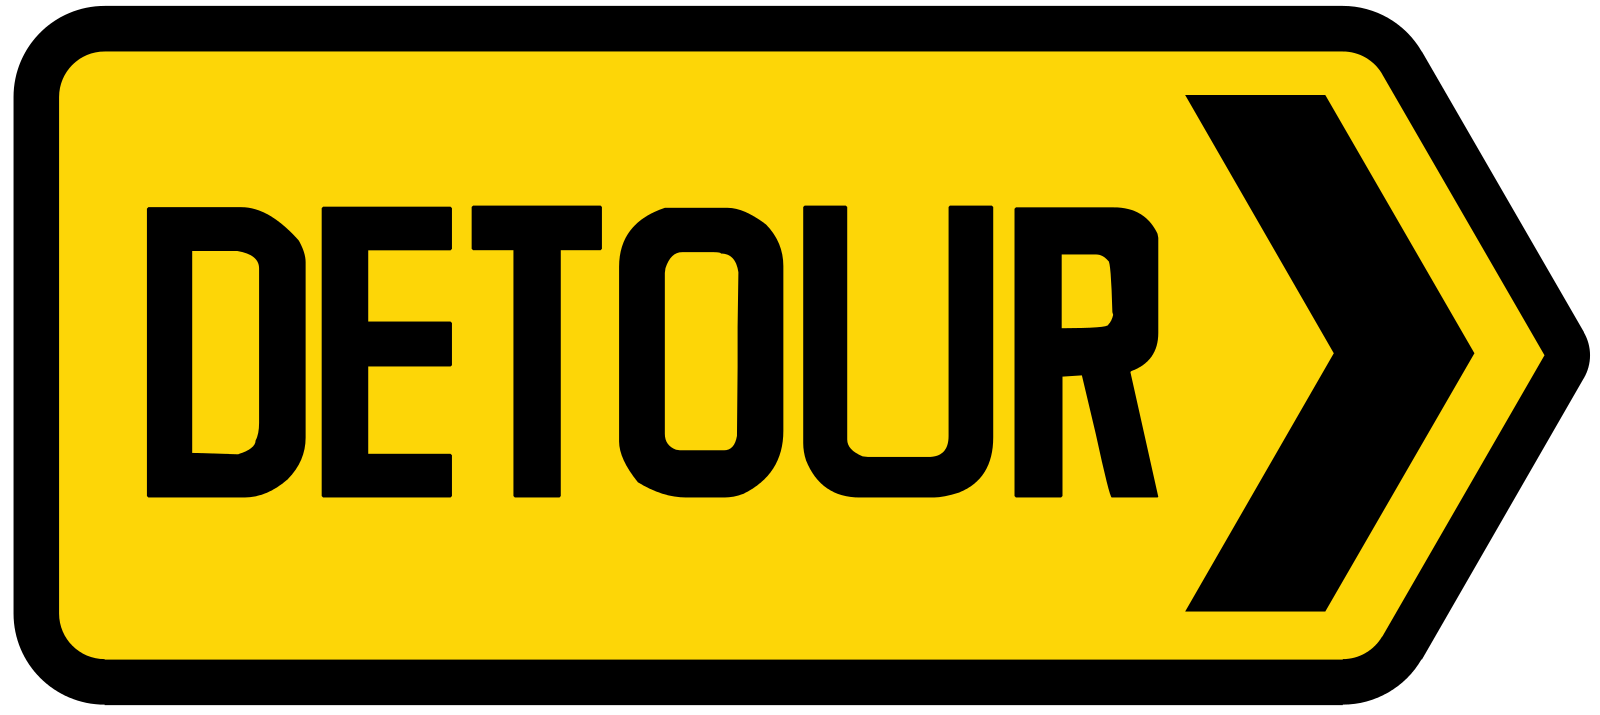 Detour in direction indicated at junction (Right)